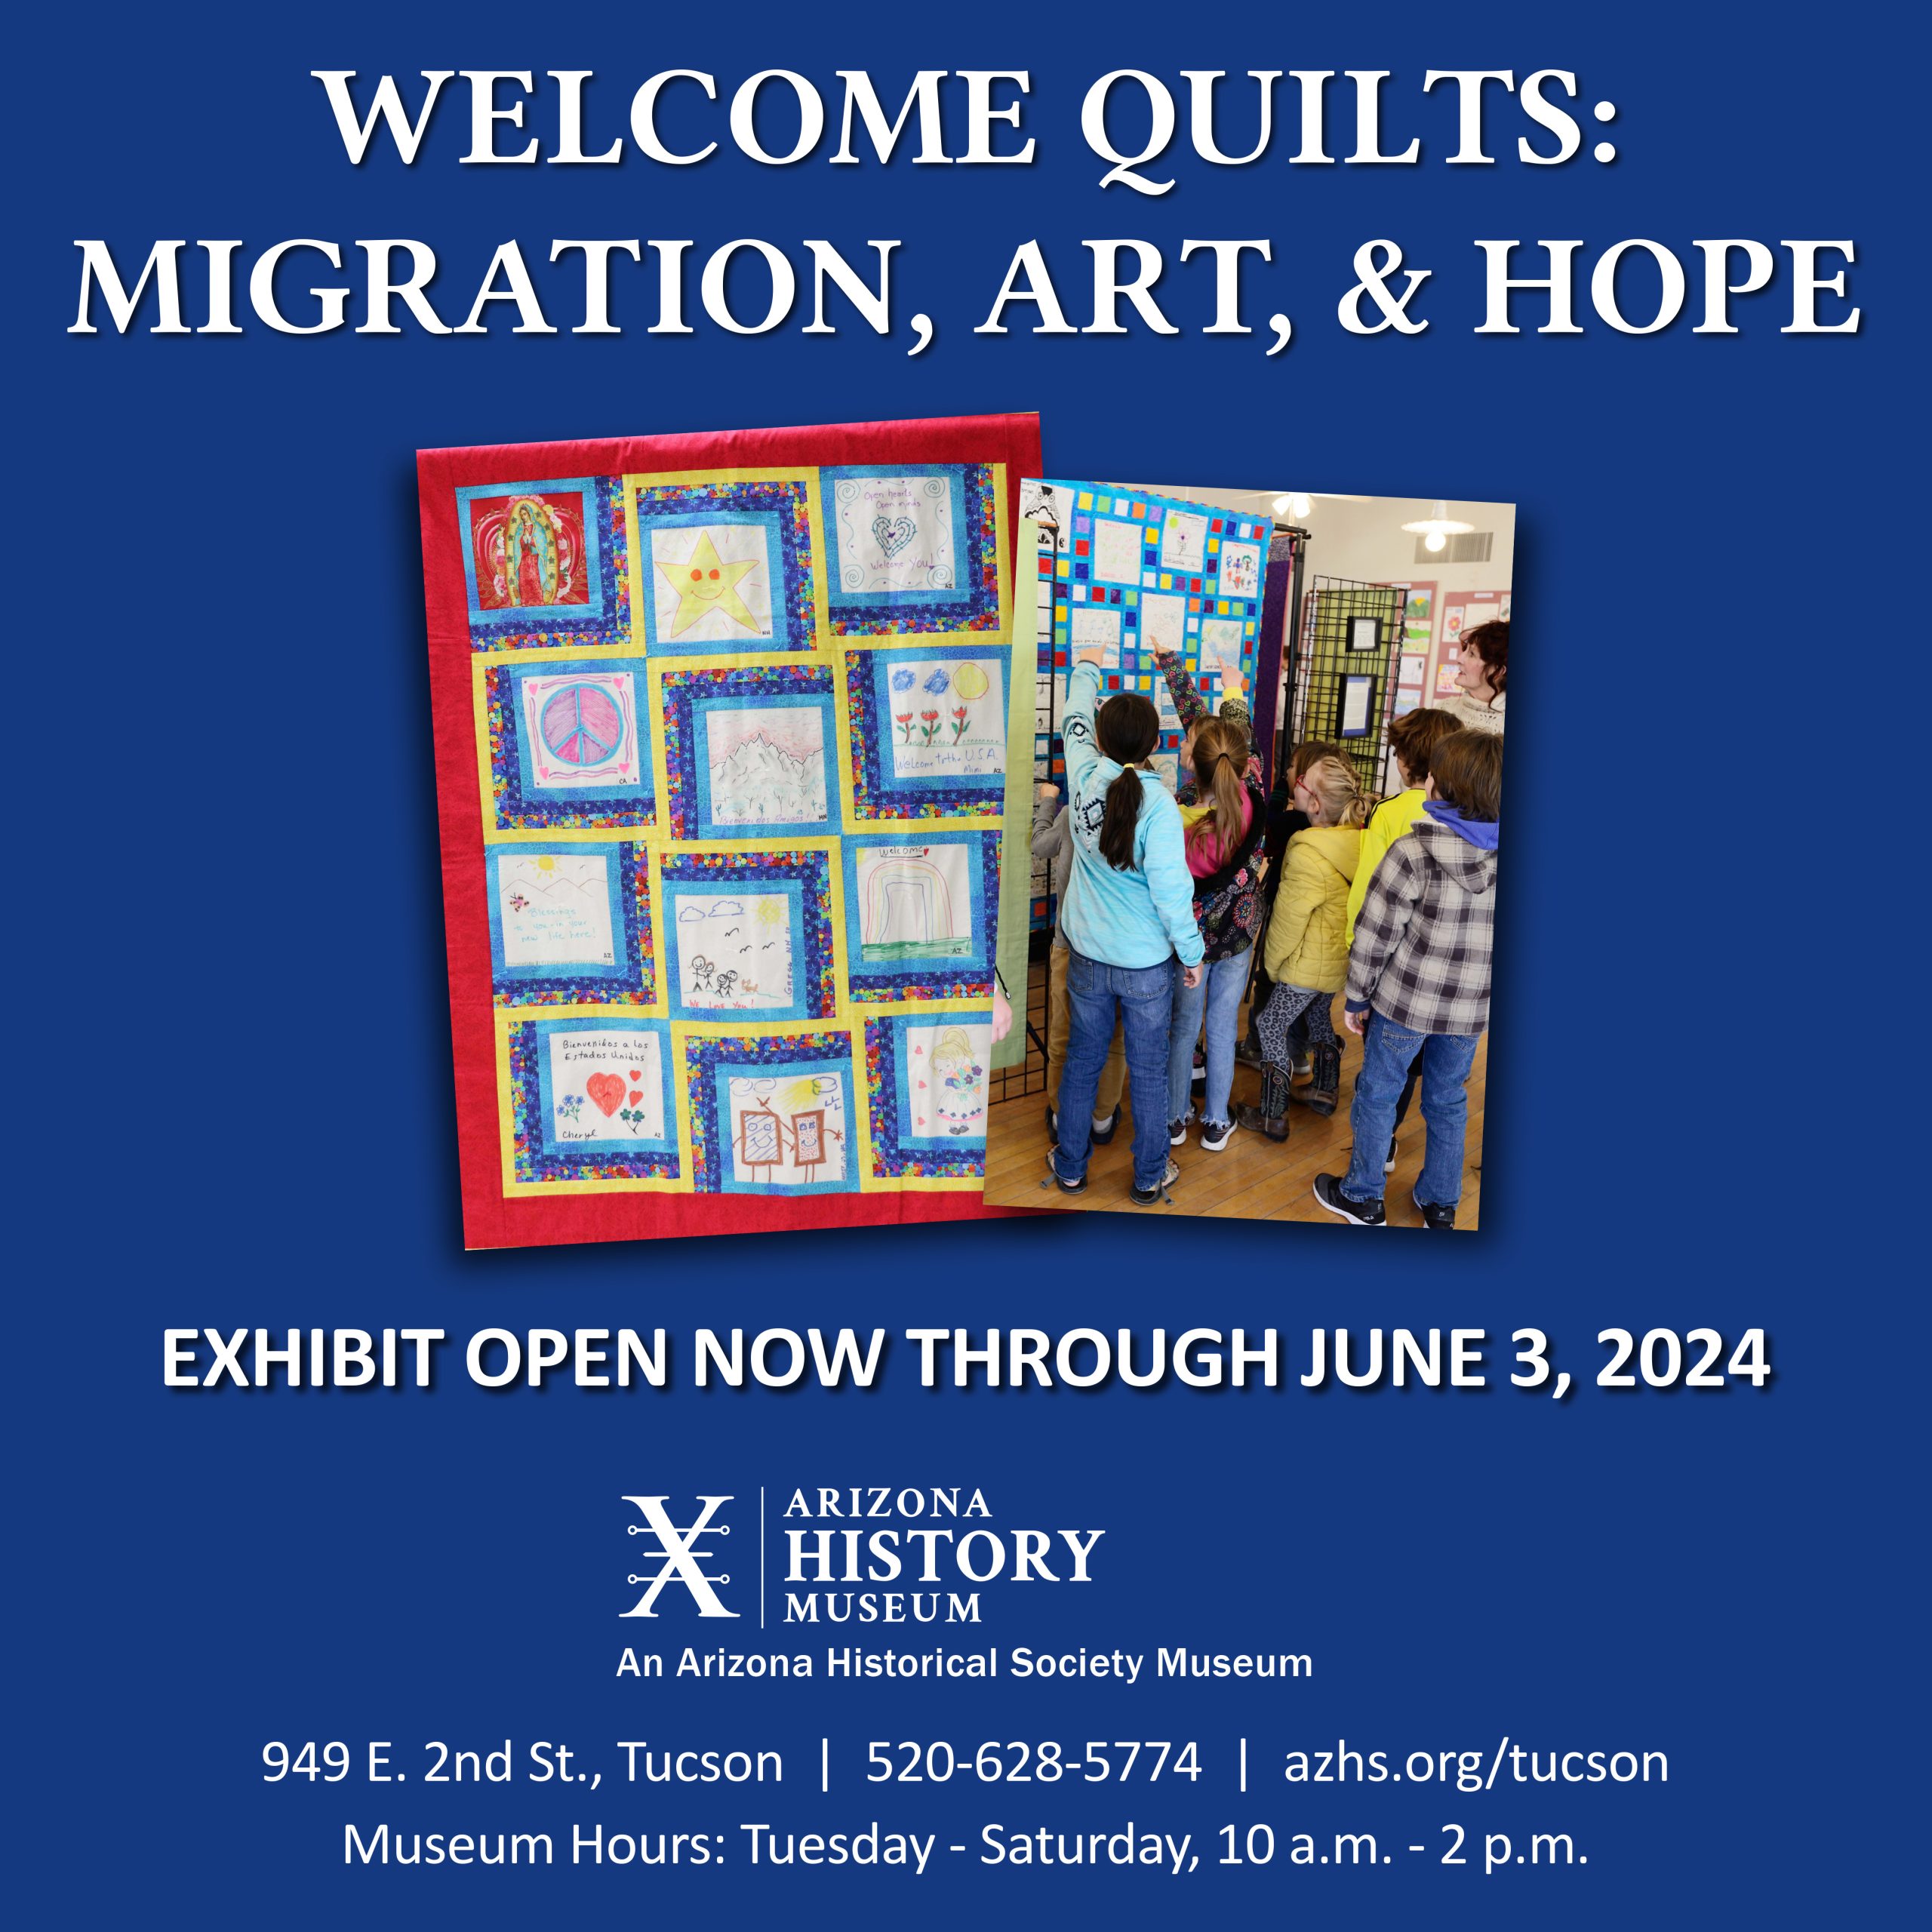 Welcome Quilts: Migration, Art, & Hope